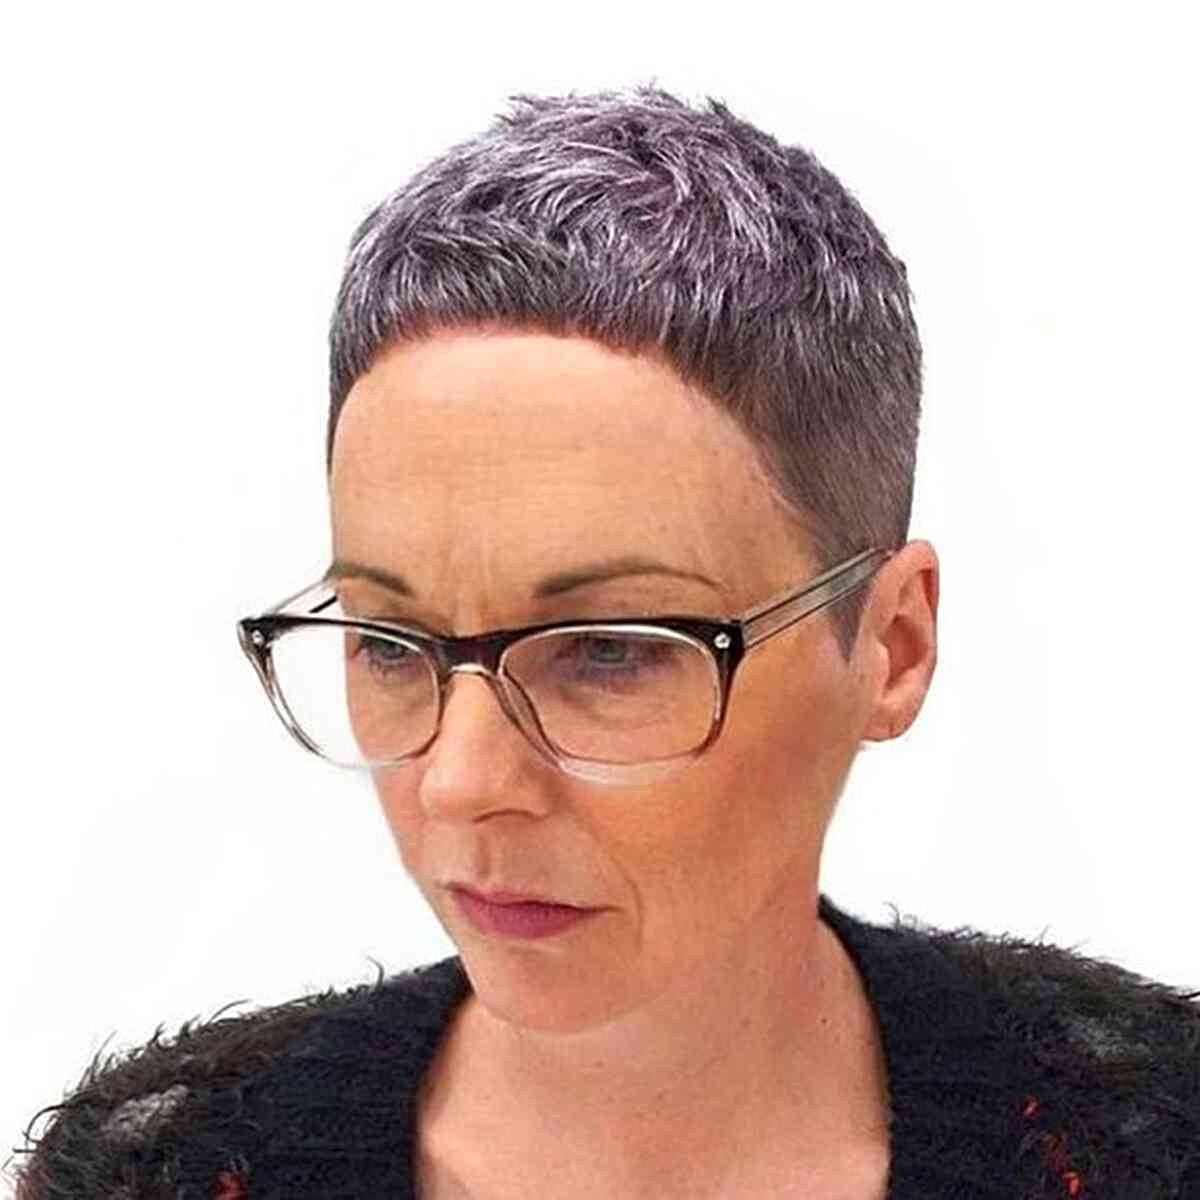 Super Short Classic Pixie on Ladies in their 50s Wearing Glasses